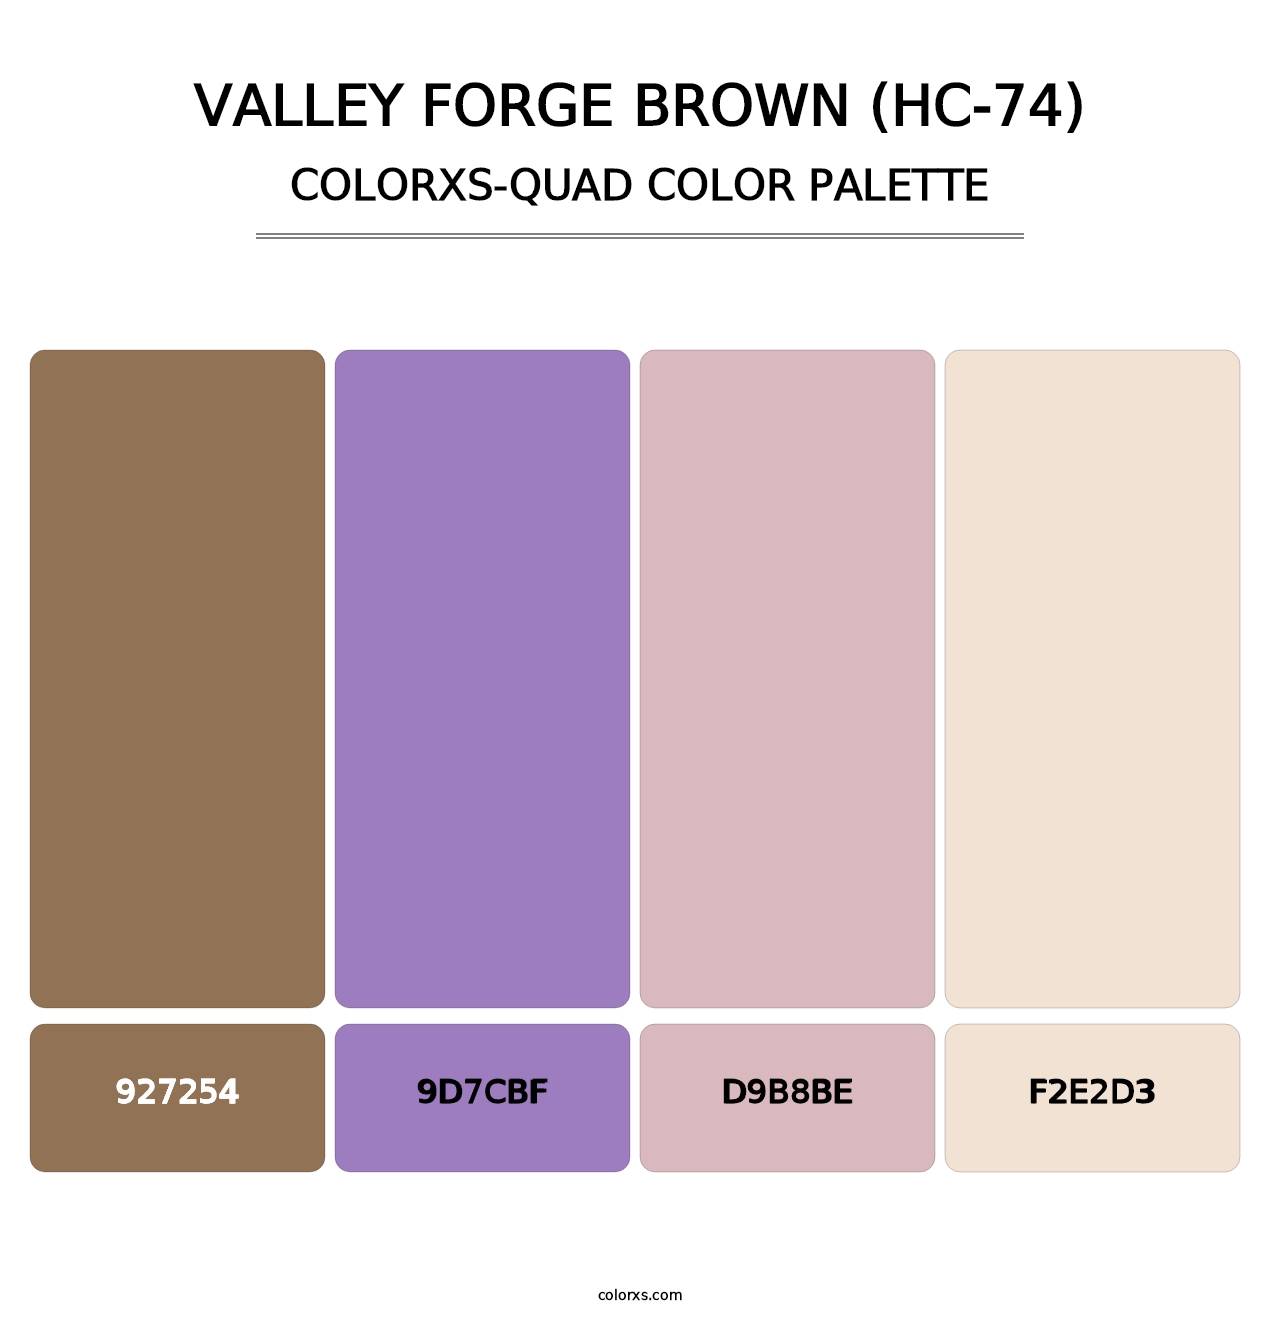 Valley Forge Brown (HC-74) - Colorxs Quad Palette